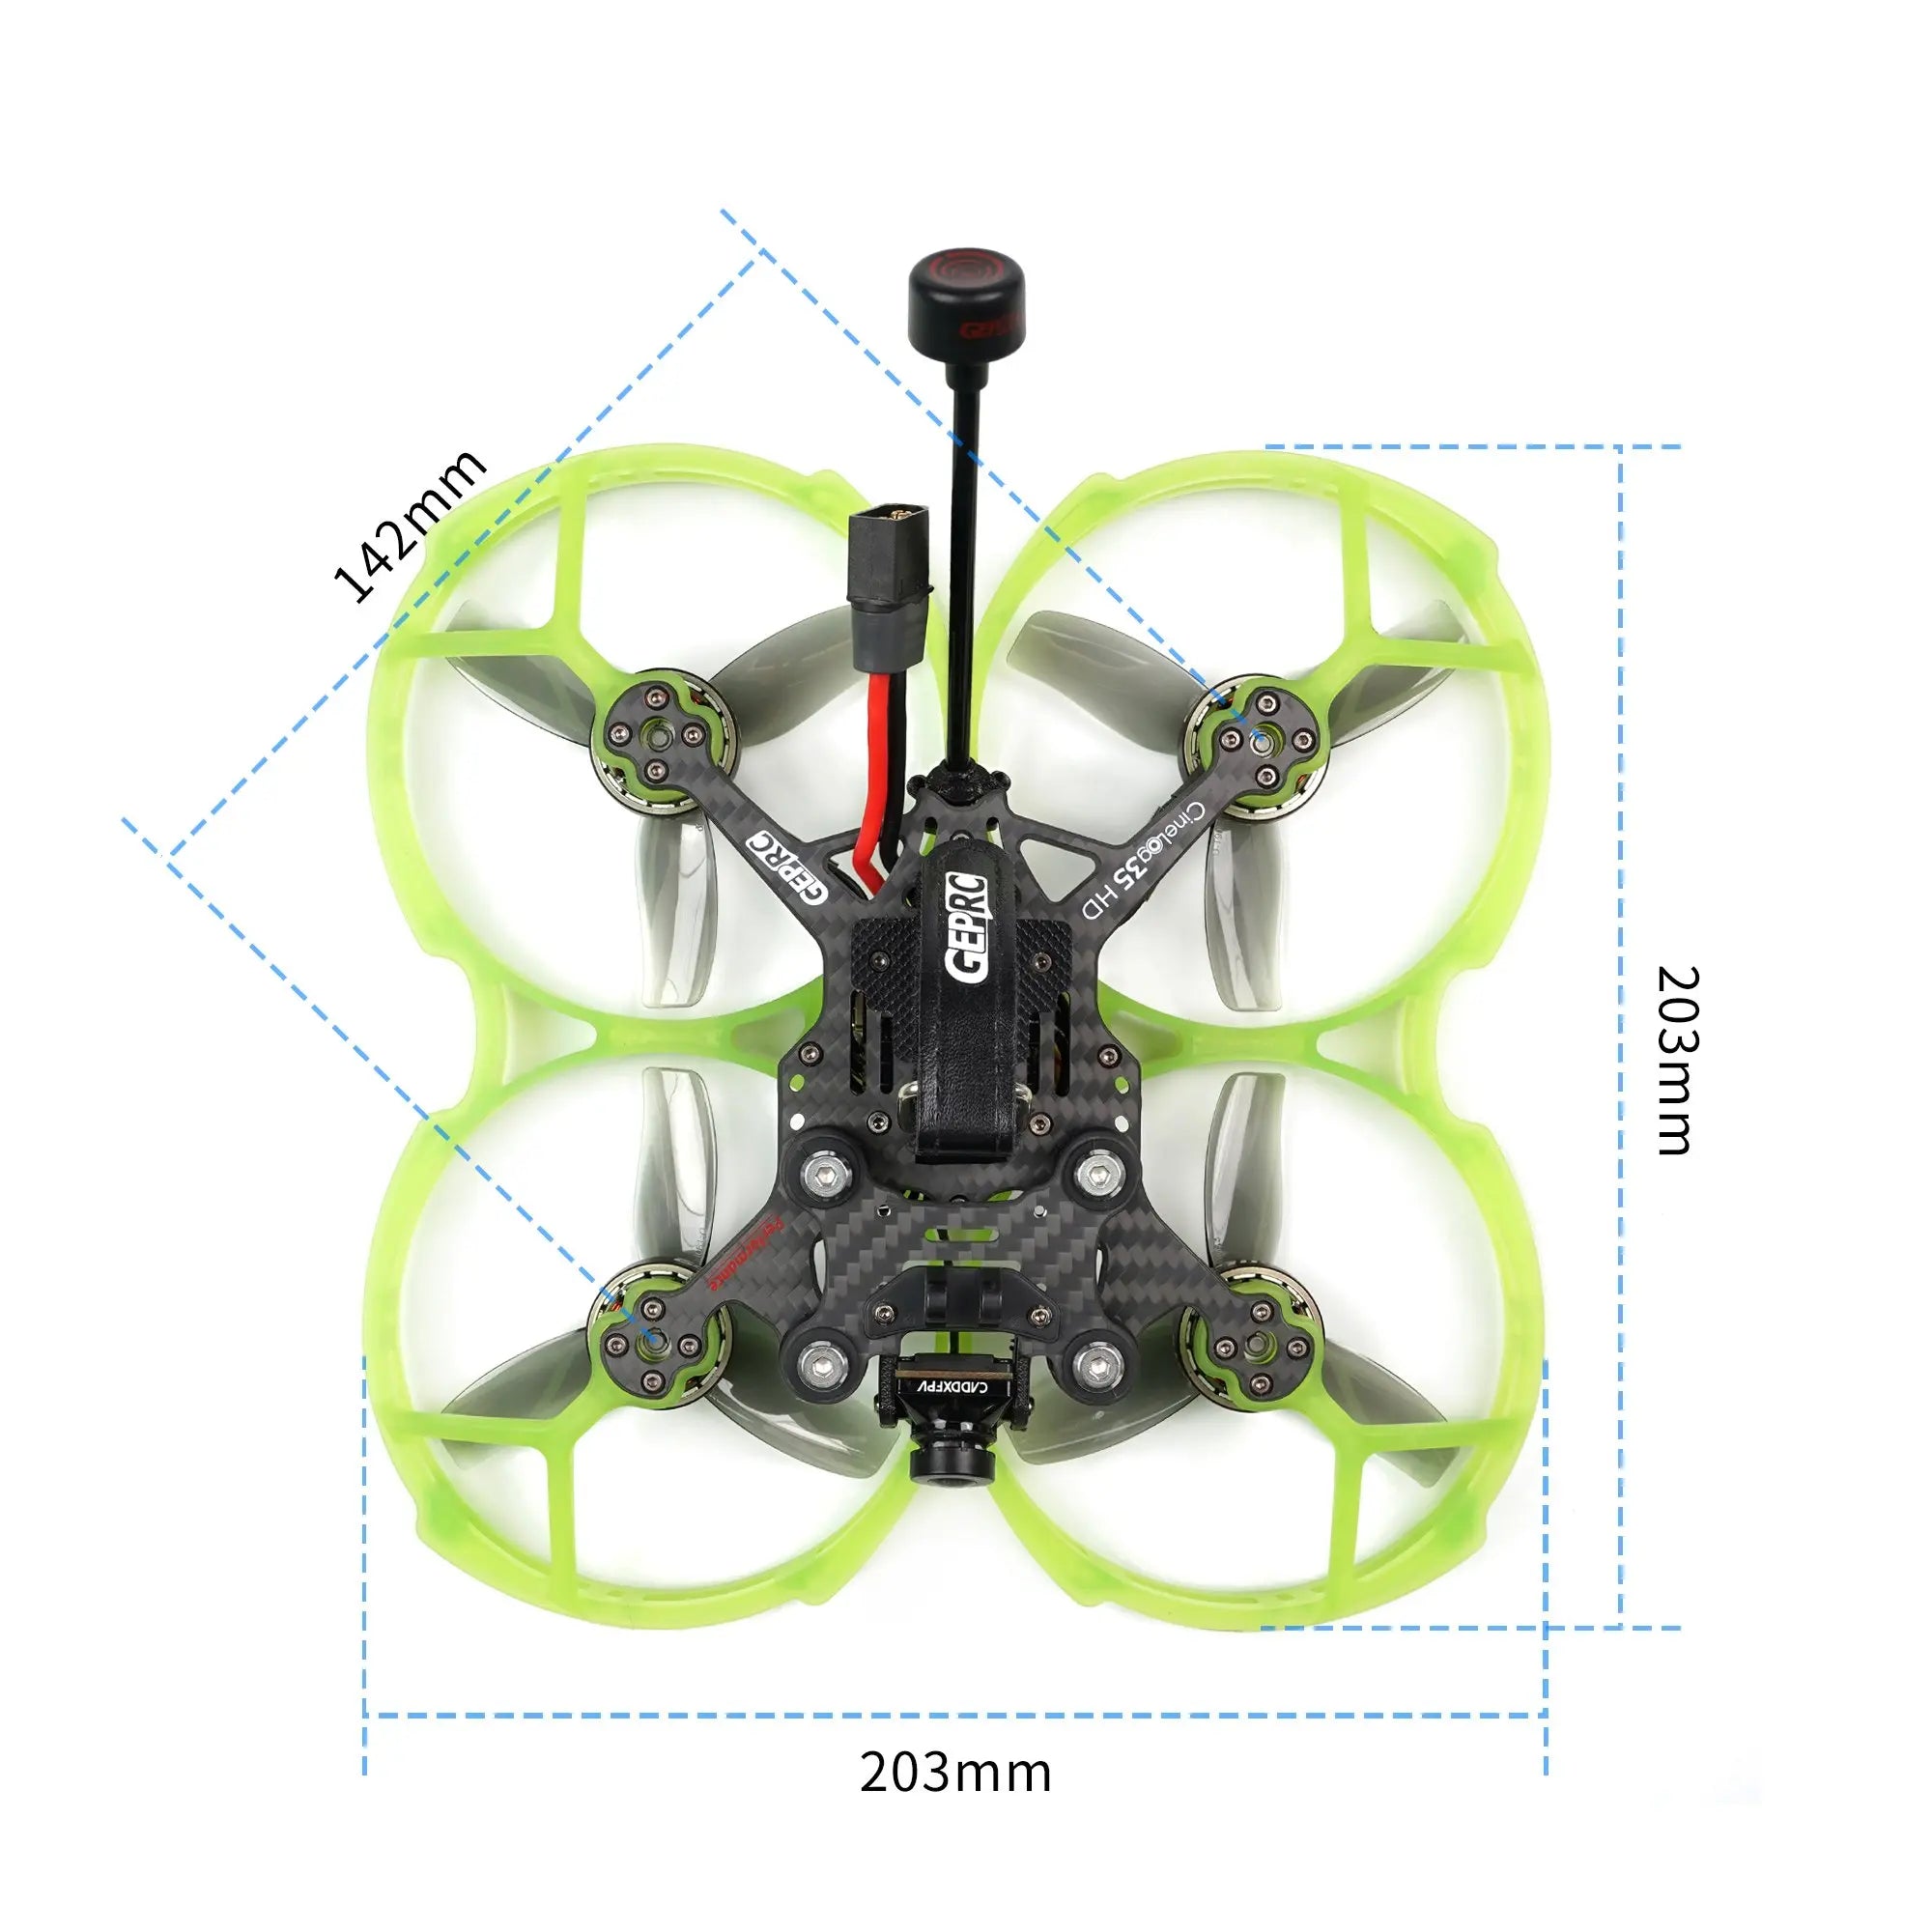 GEPRC CineLog35 Cinewhoop, integrated propeller guard, hollowed-out weight reduction and noise reduction design, quiet and